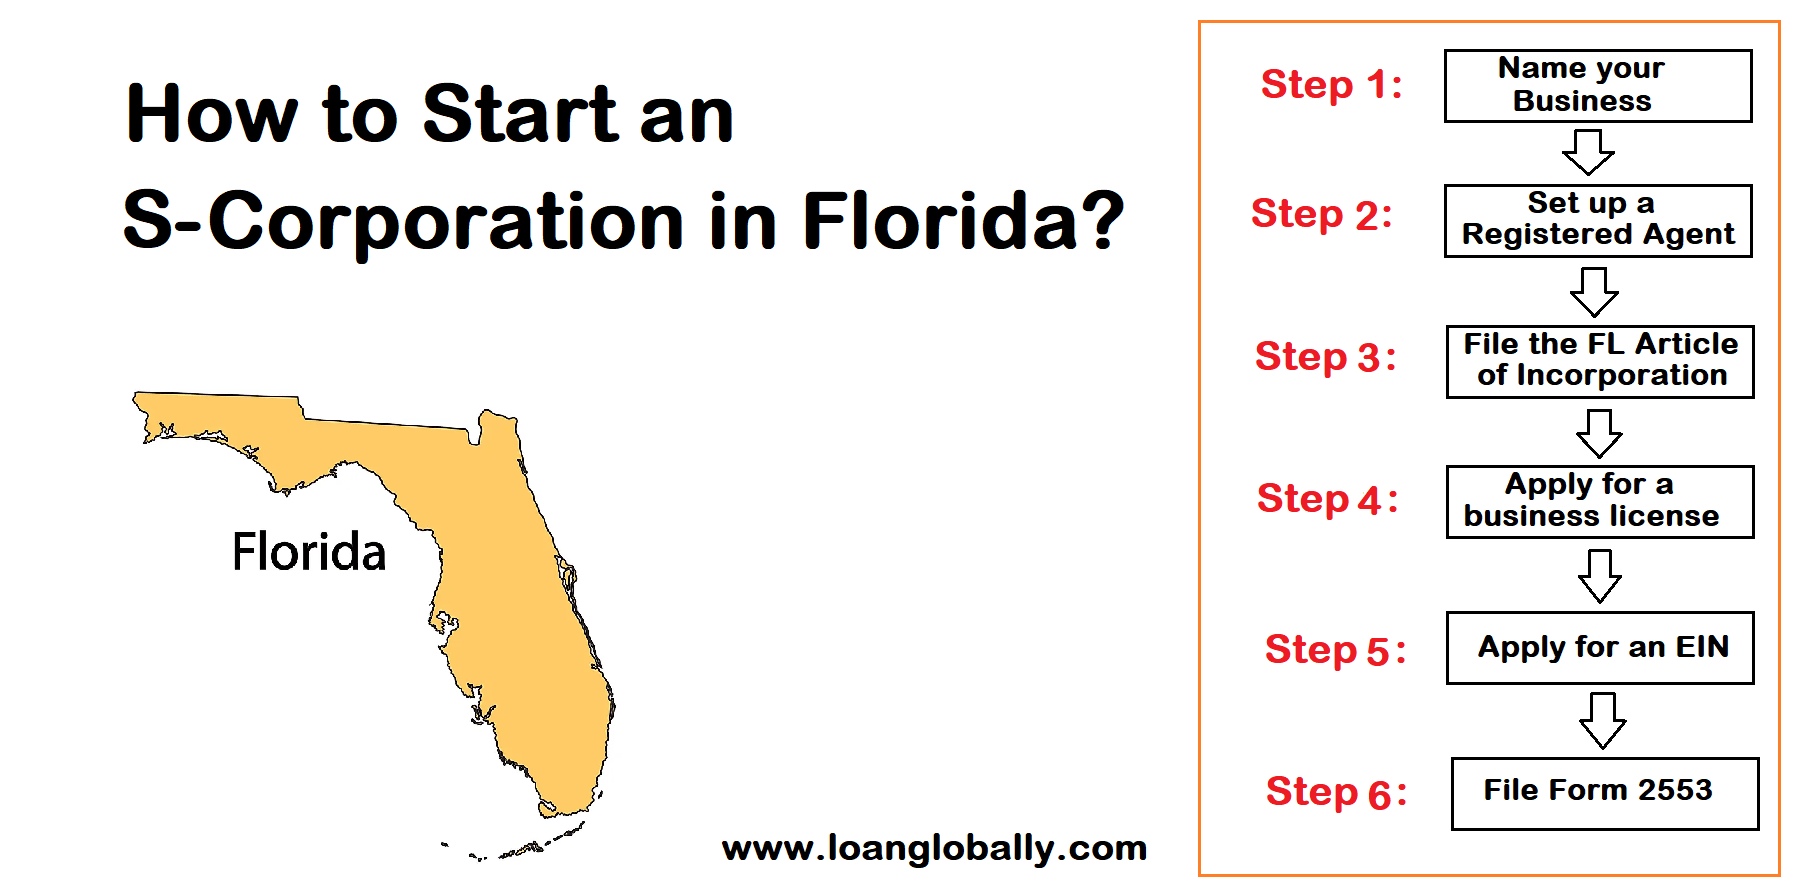 How to Start an S-Corporation in Florida?